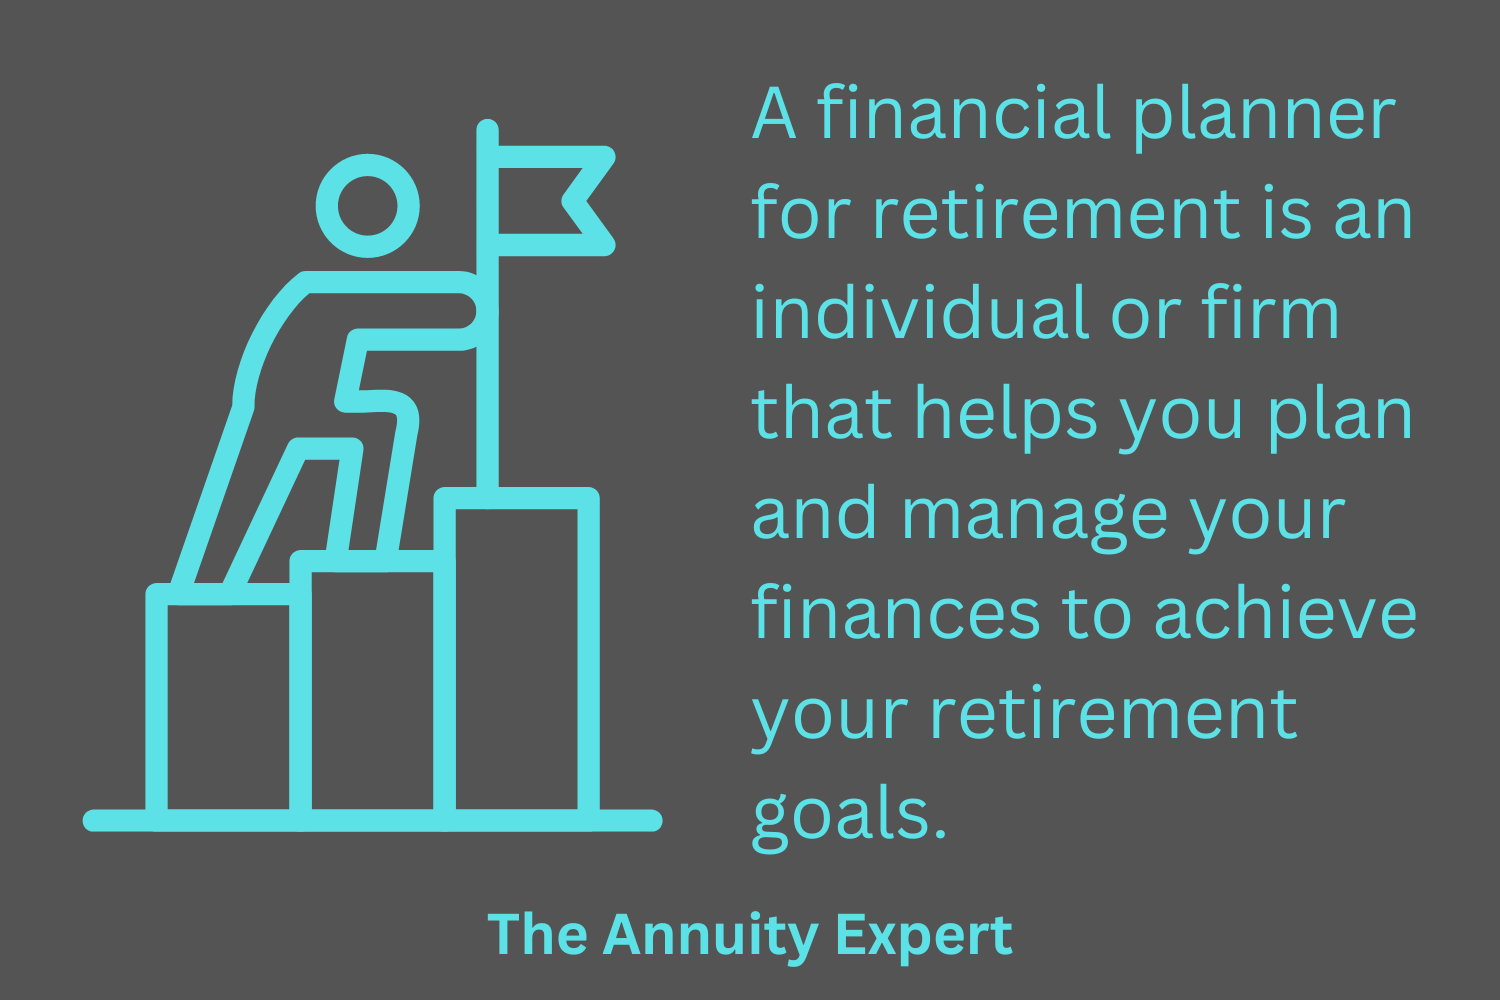 What Is A Financial Planner For Retirement?